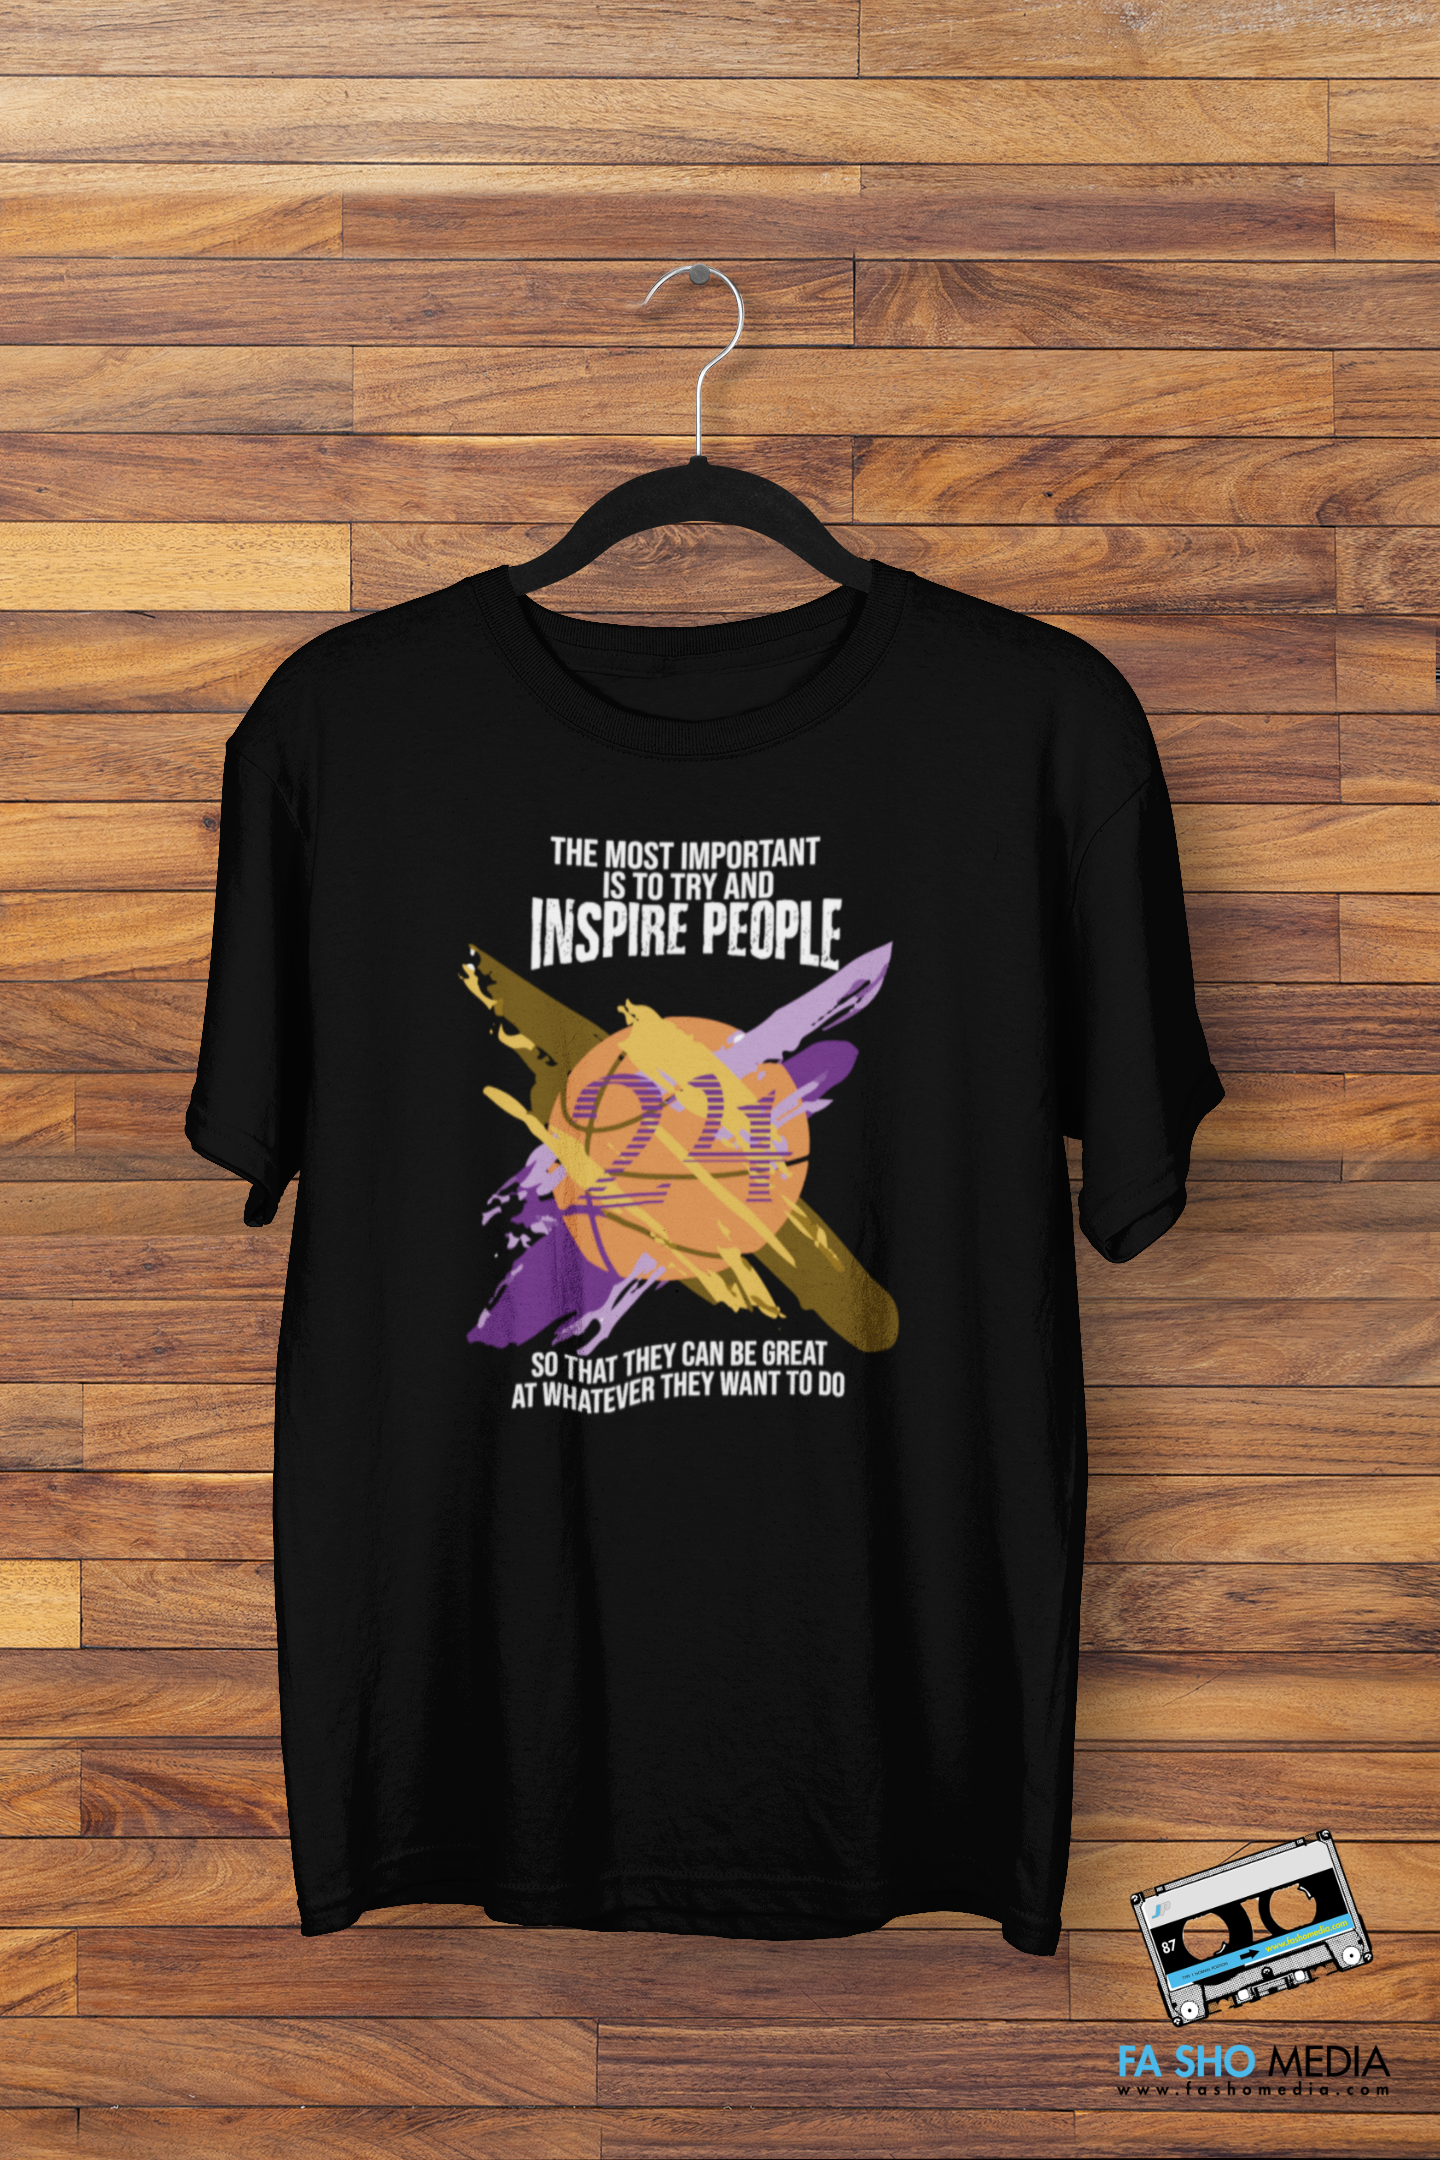 Inspire Others Shirt